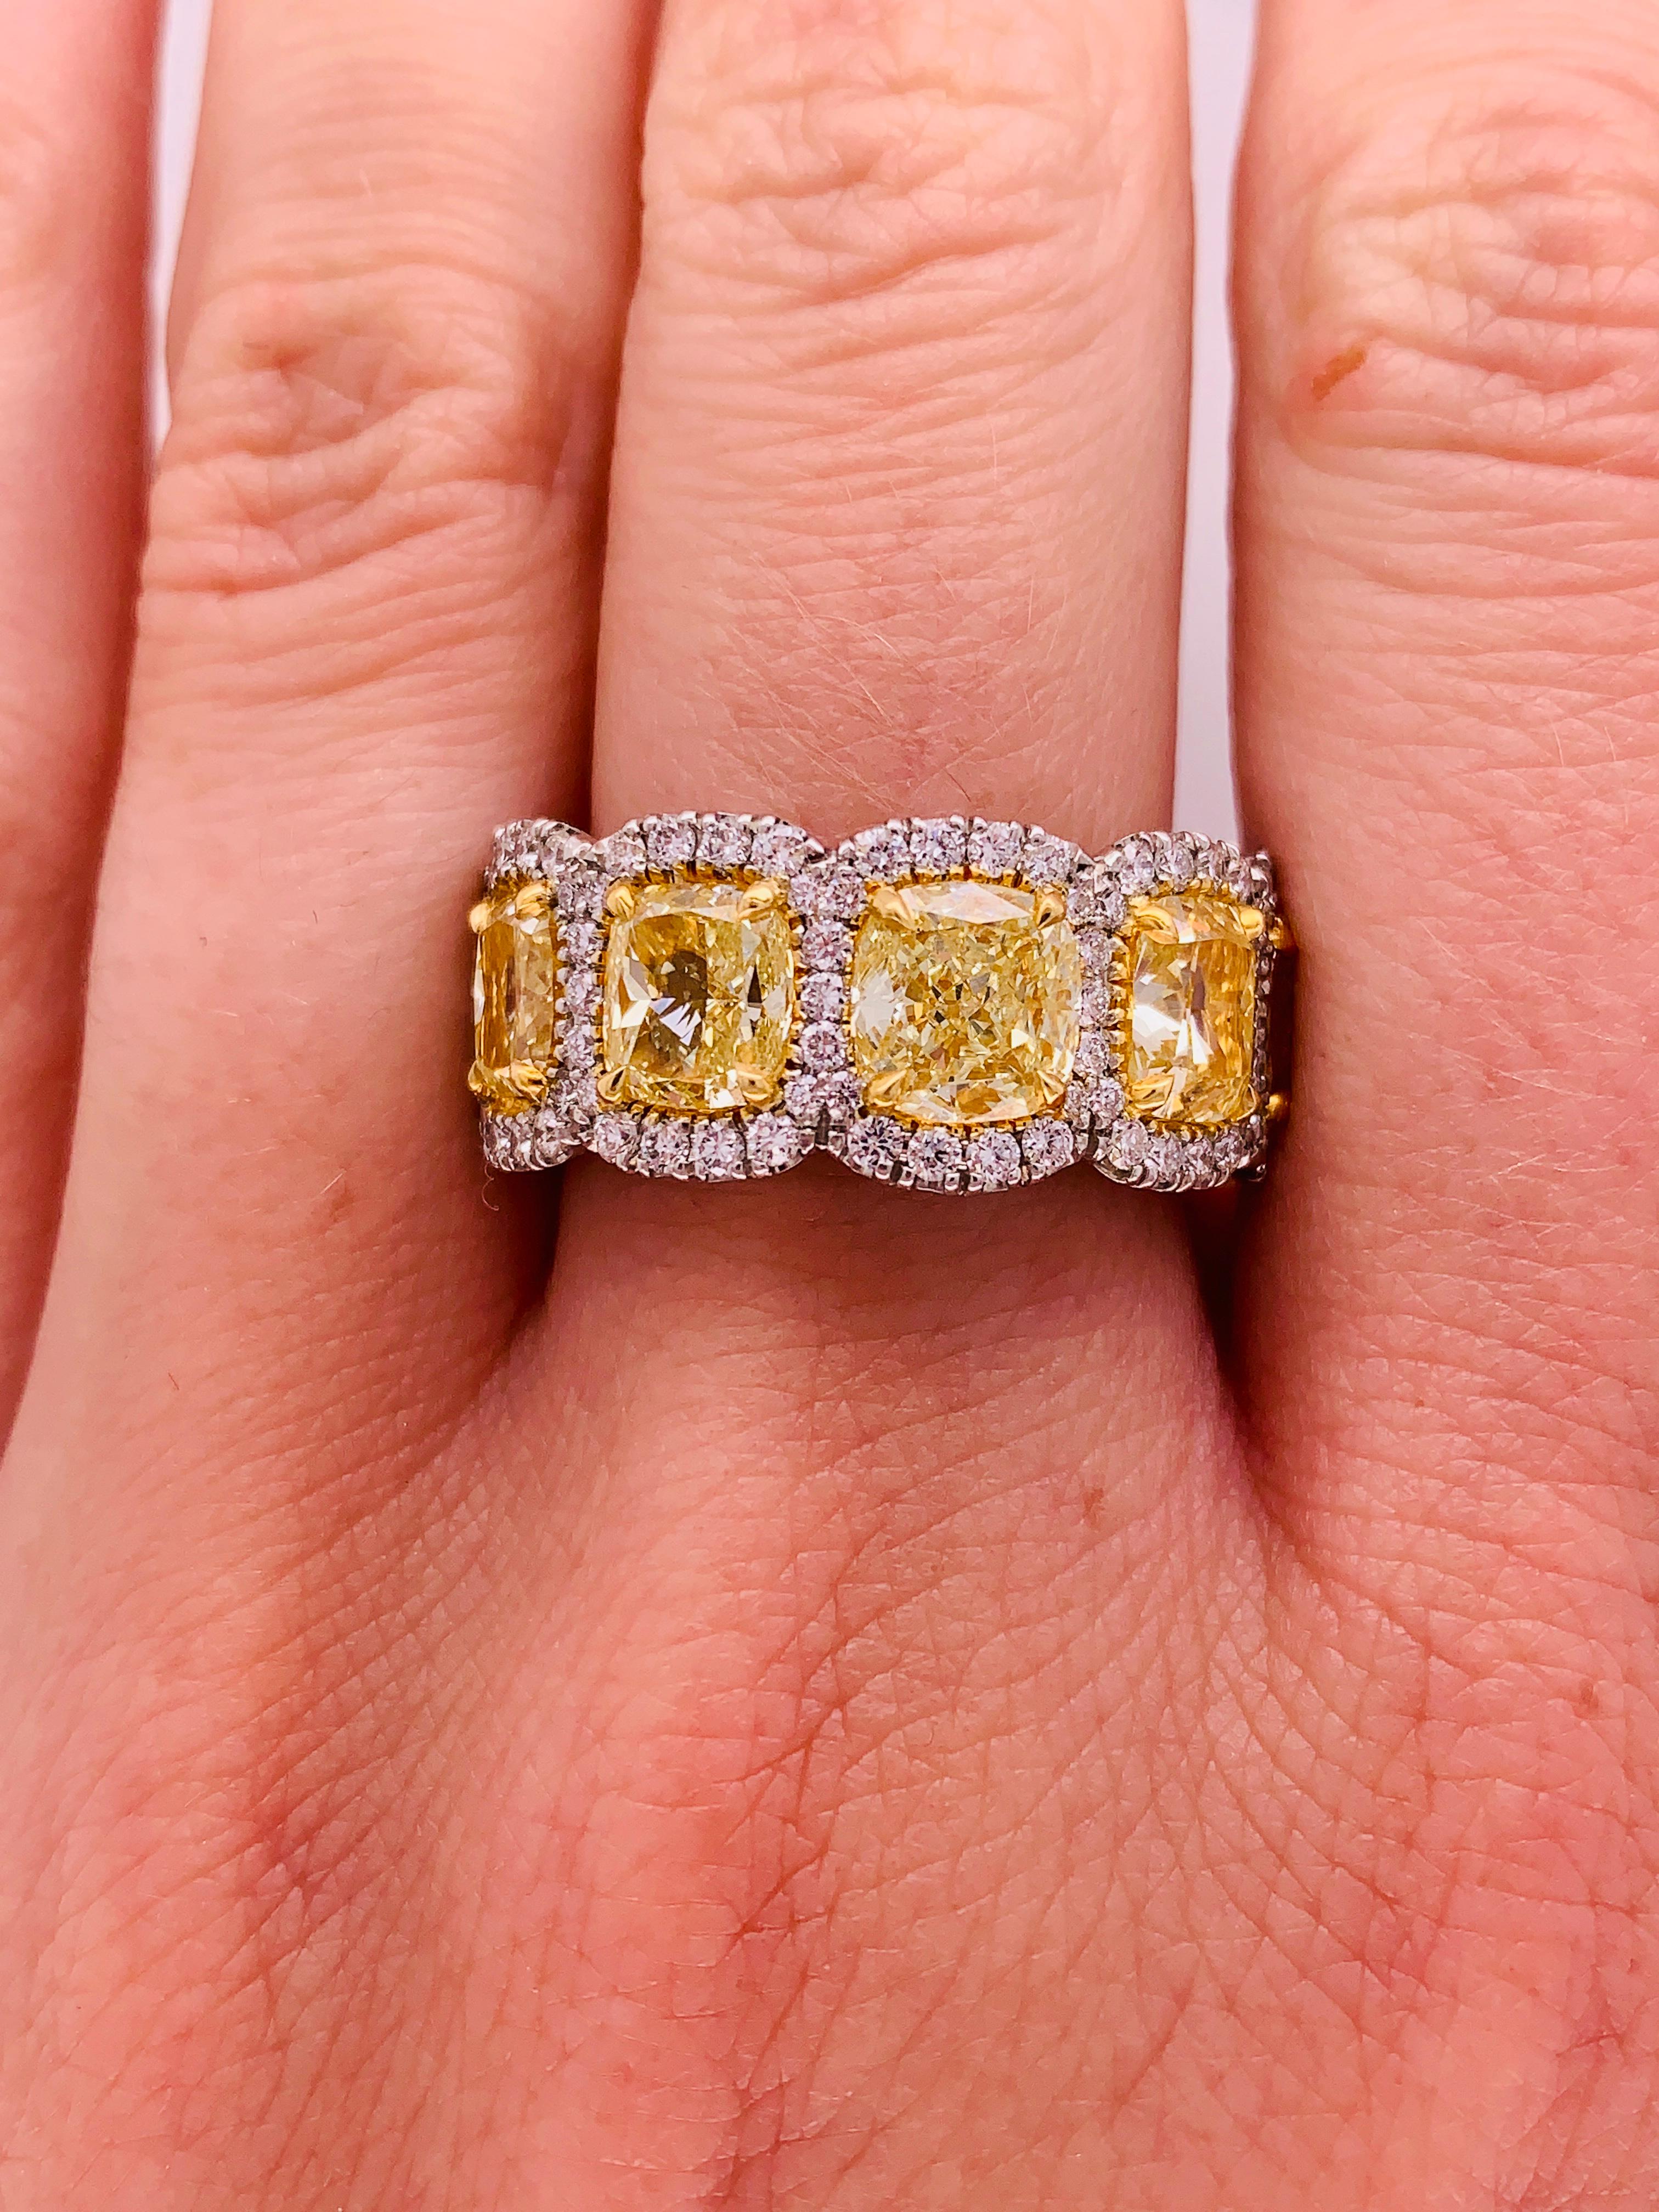 Magnificent Fancy Yellow diamond diamond band, features 5.50 Carats of Fancy color Yellow Cushion Cut Diamonds, surrounded by 1.20 Carats of white round brilliant cut diamonds. Each stone is approximately 1.00 carat (plus) cushion cut. Each stone